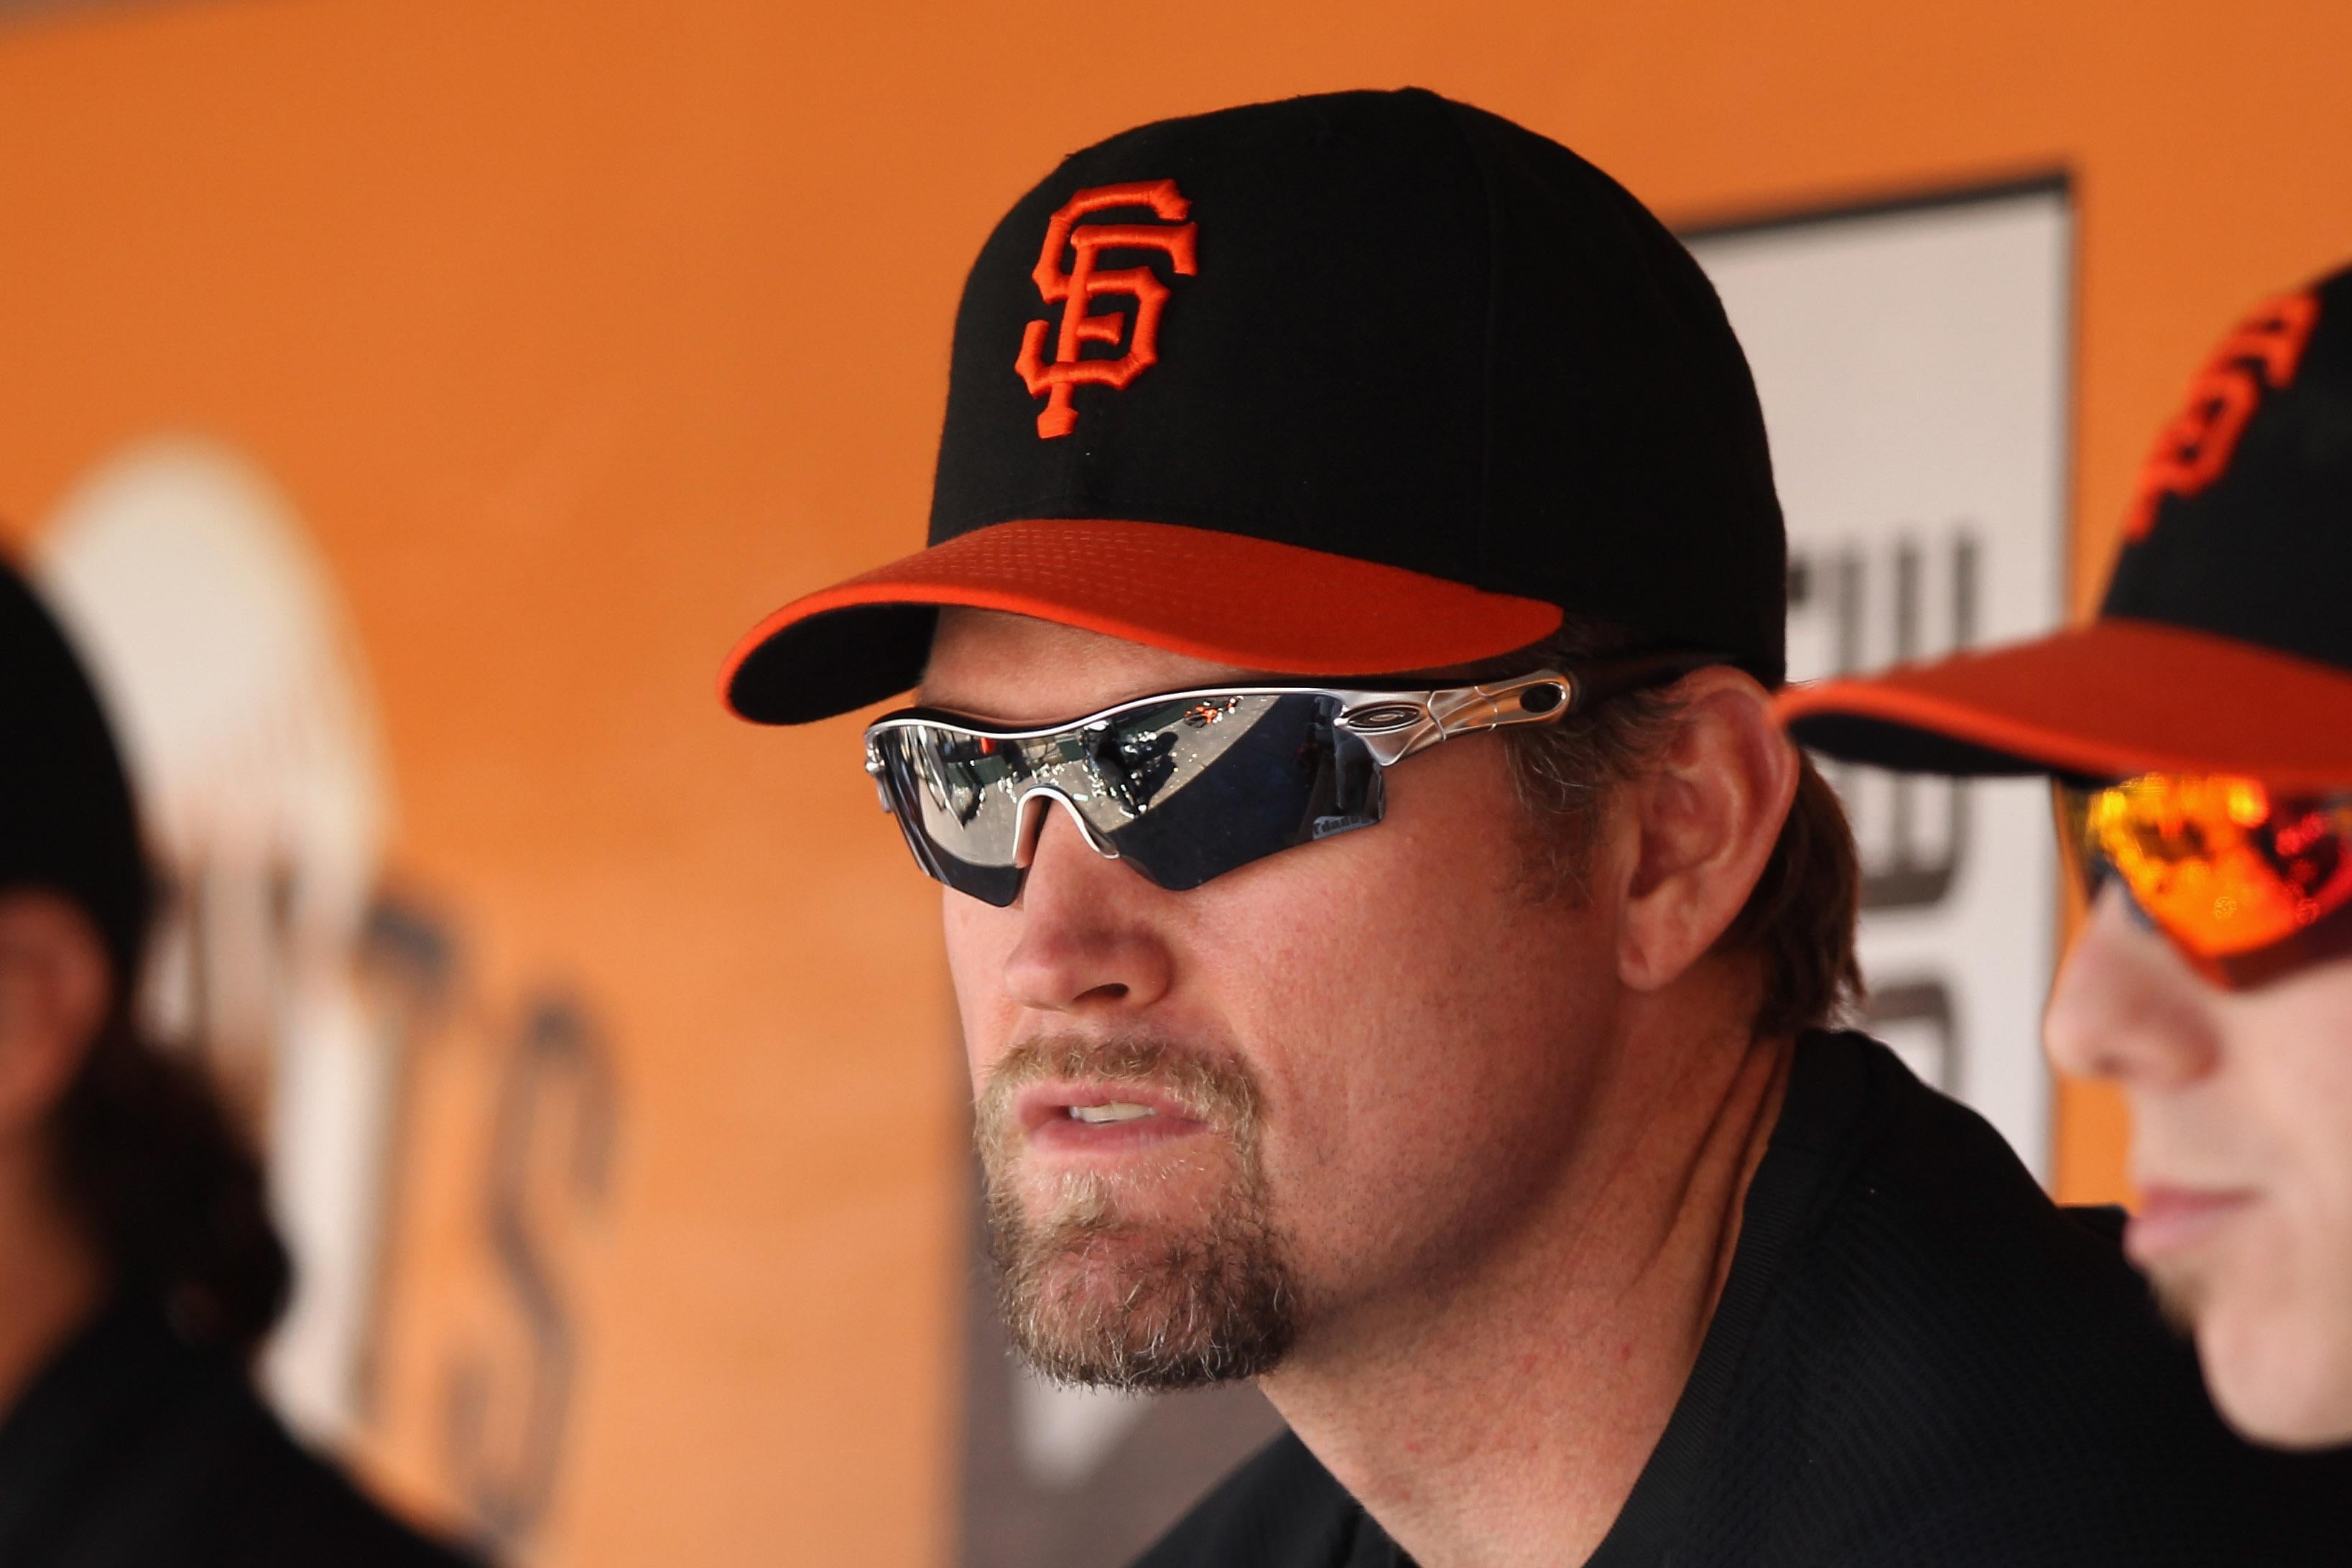 Aubrey Huff and Tim Lincecum sitting in the dugout in their Giants hats and wraparound sunglasses.